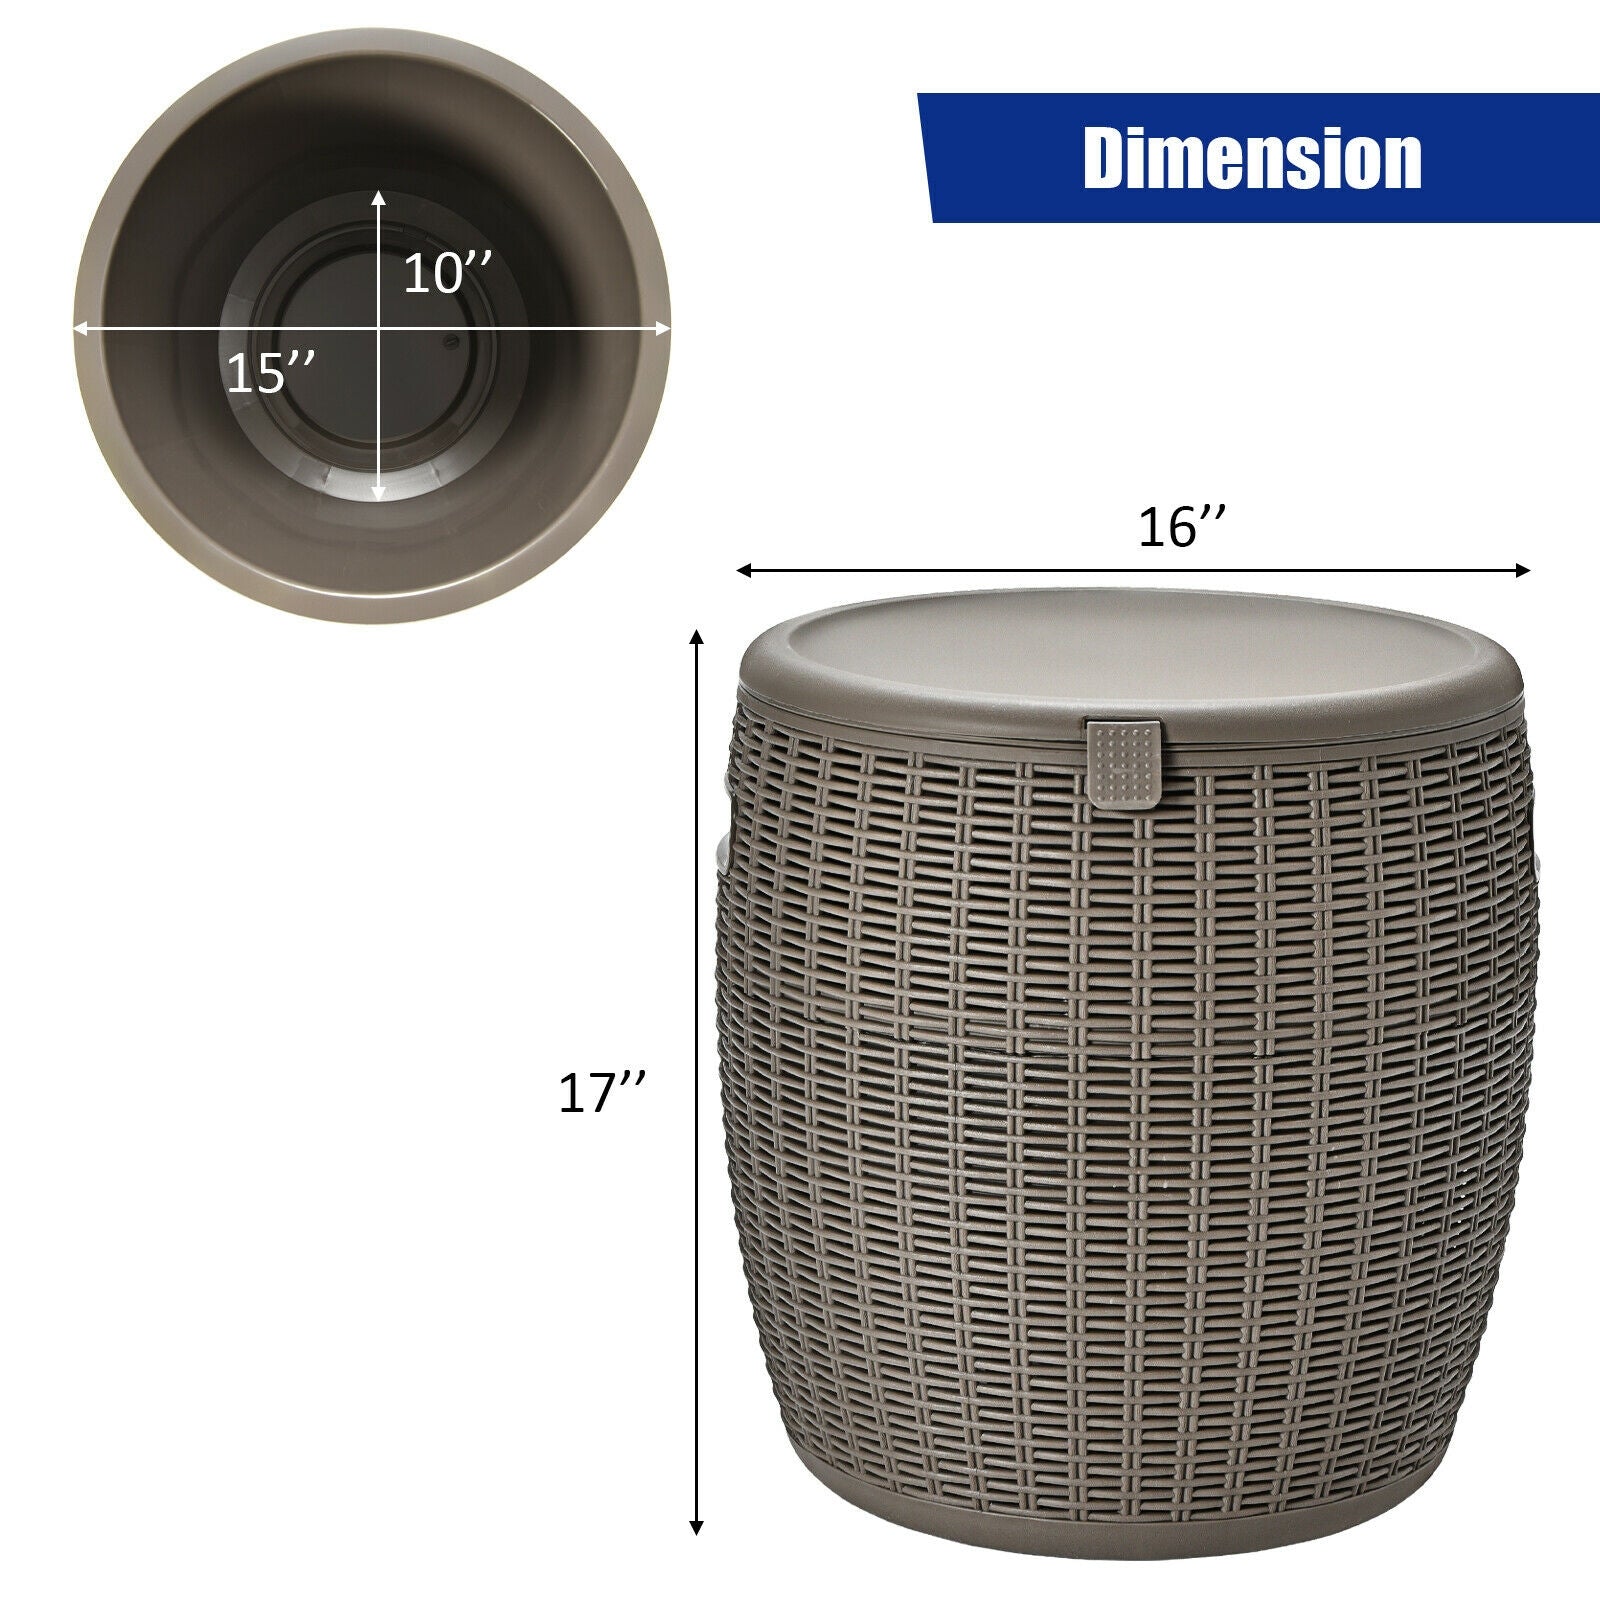 All-Weather Durability and Easy Assembly: Made of durable PP material, the ice bucket ensures stability and withstands various weather conditions. It comes pre-assembled and can be used right away. The smooth inner surface allows for easy cleaning. Overall dimensions: Φ16" x 17" (H).